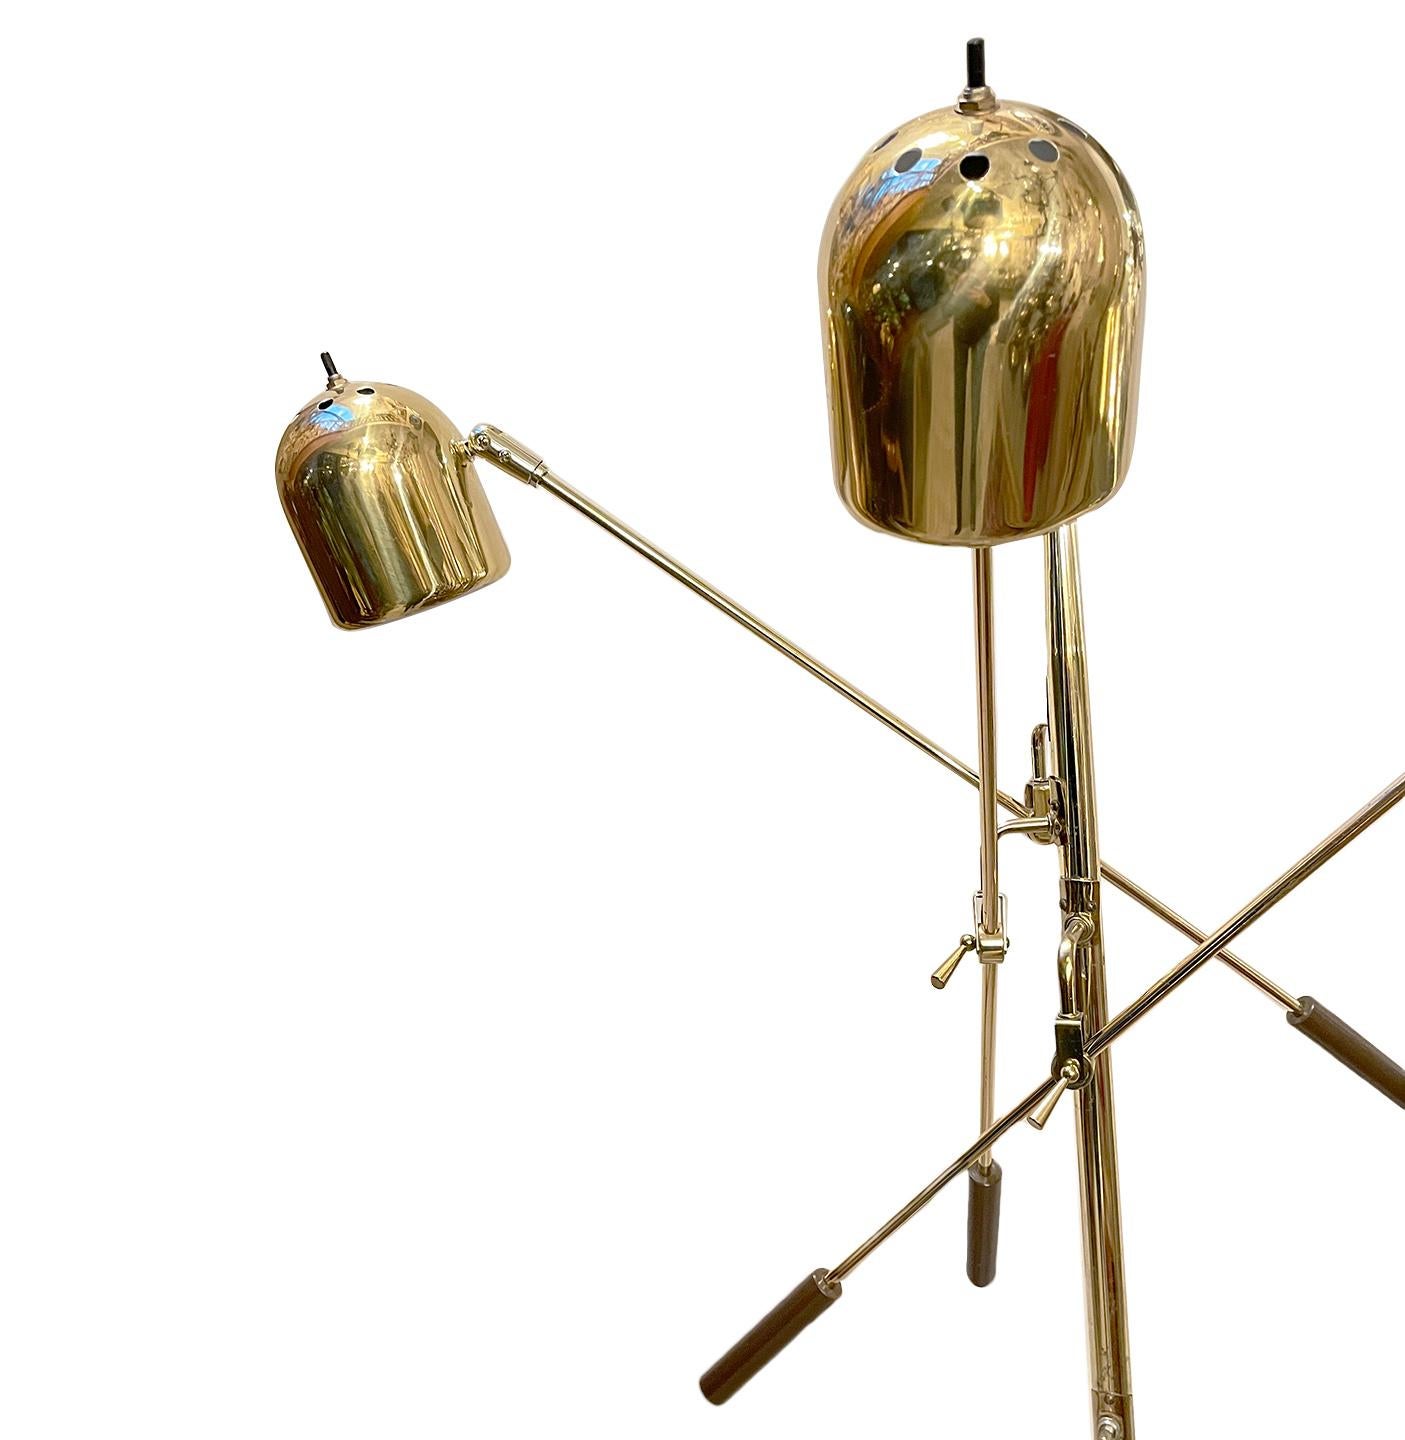 A circa 1960's Italian moderne brass floor lamp with swivel shades and white marble base and original finish.

Measurements:
Height: 60.5